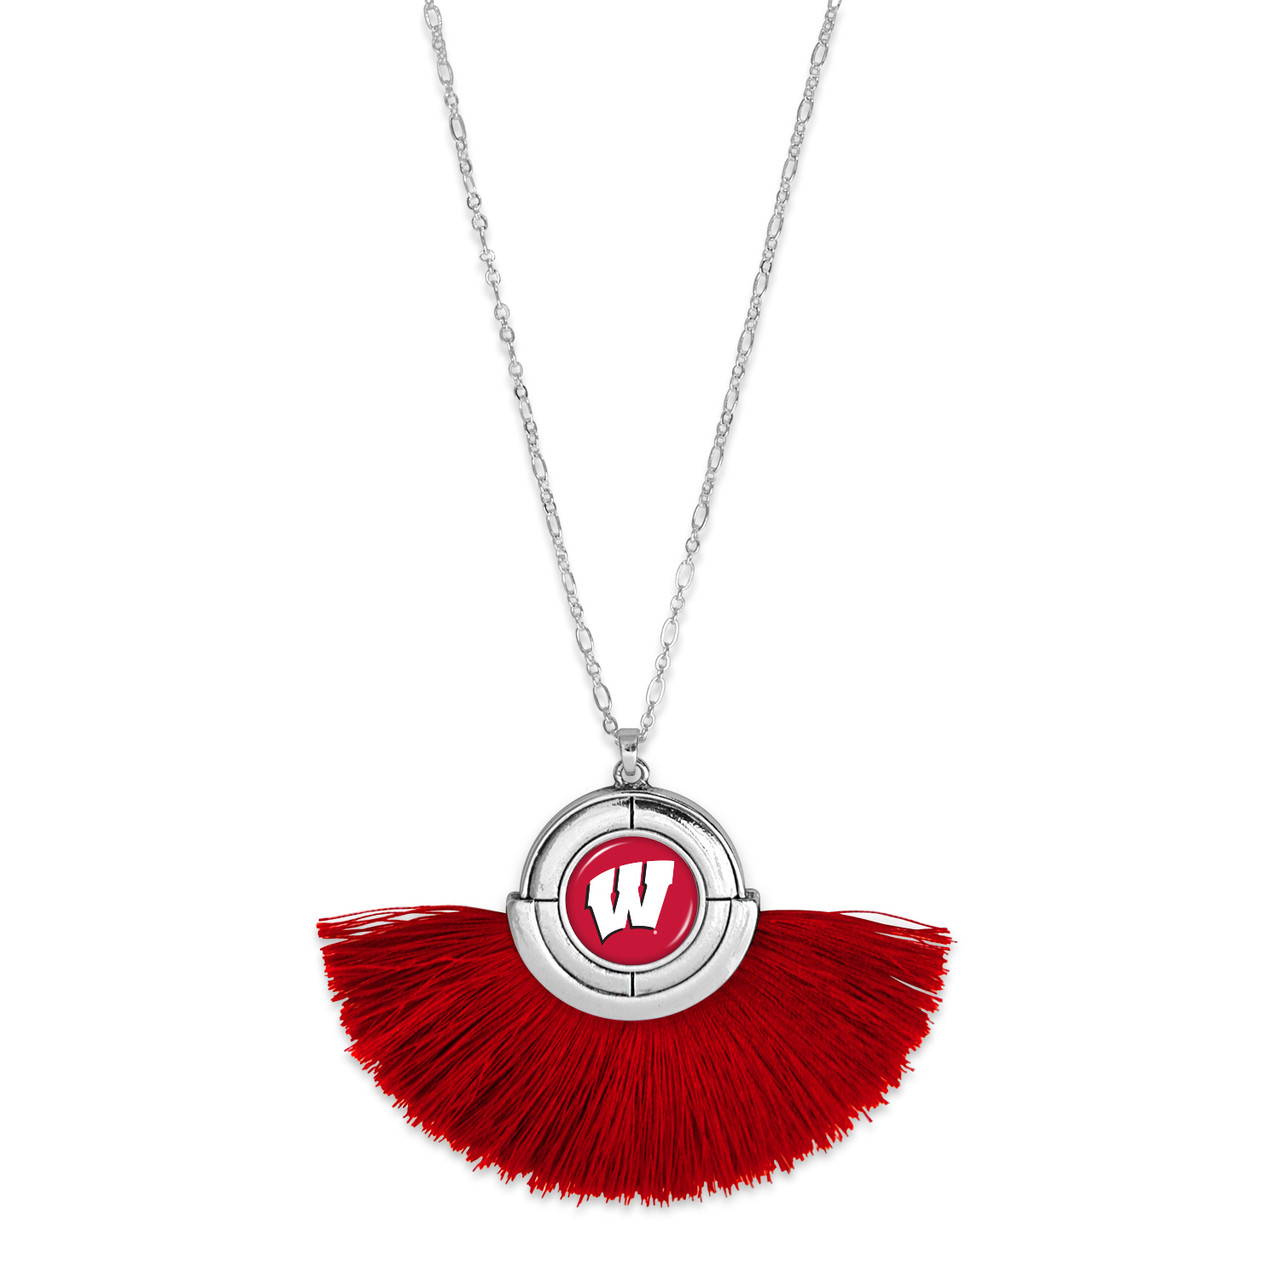 Wisconsin Badgers Necklace- No Strings Attached